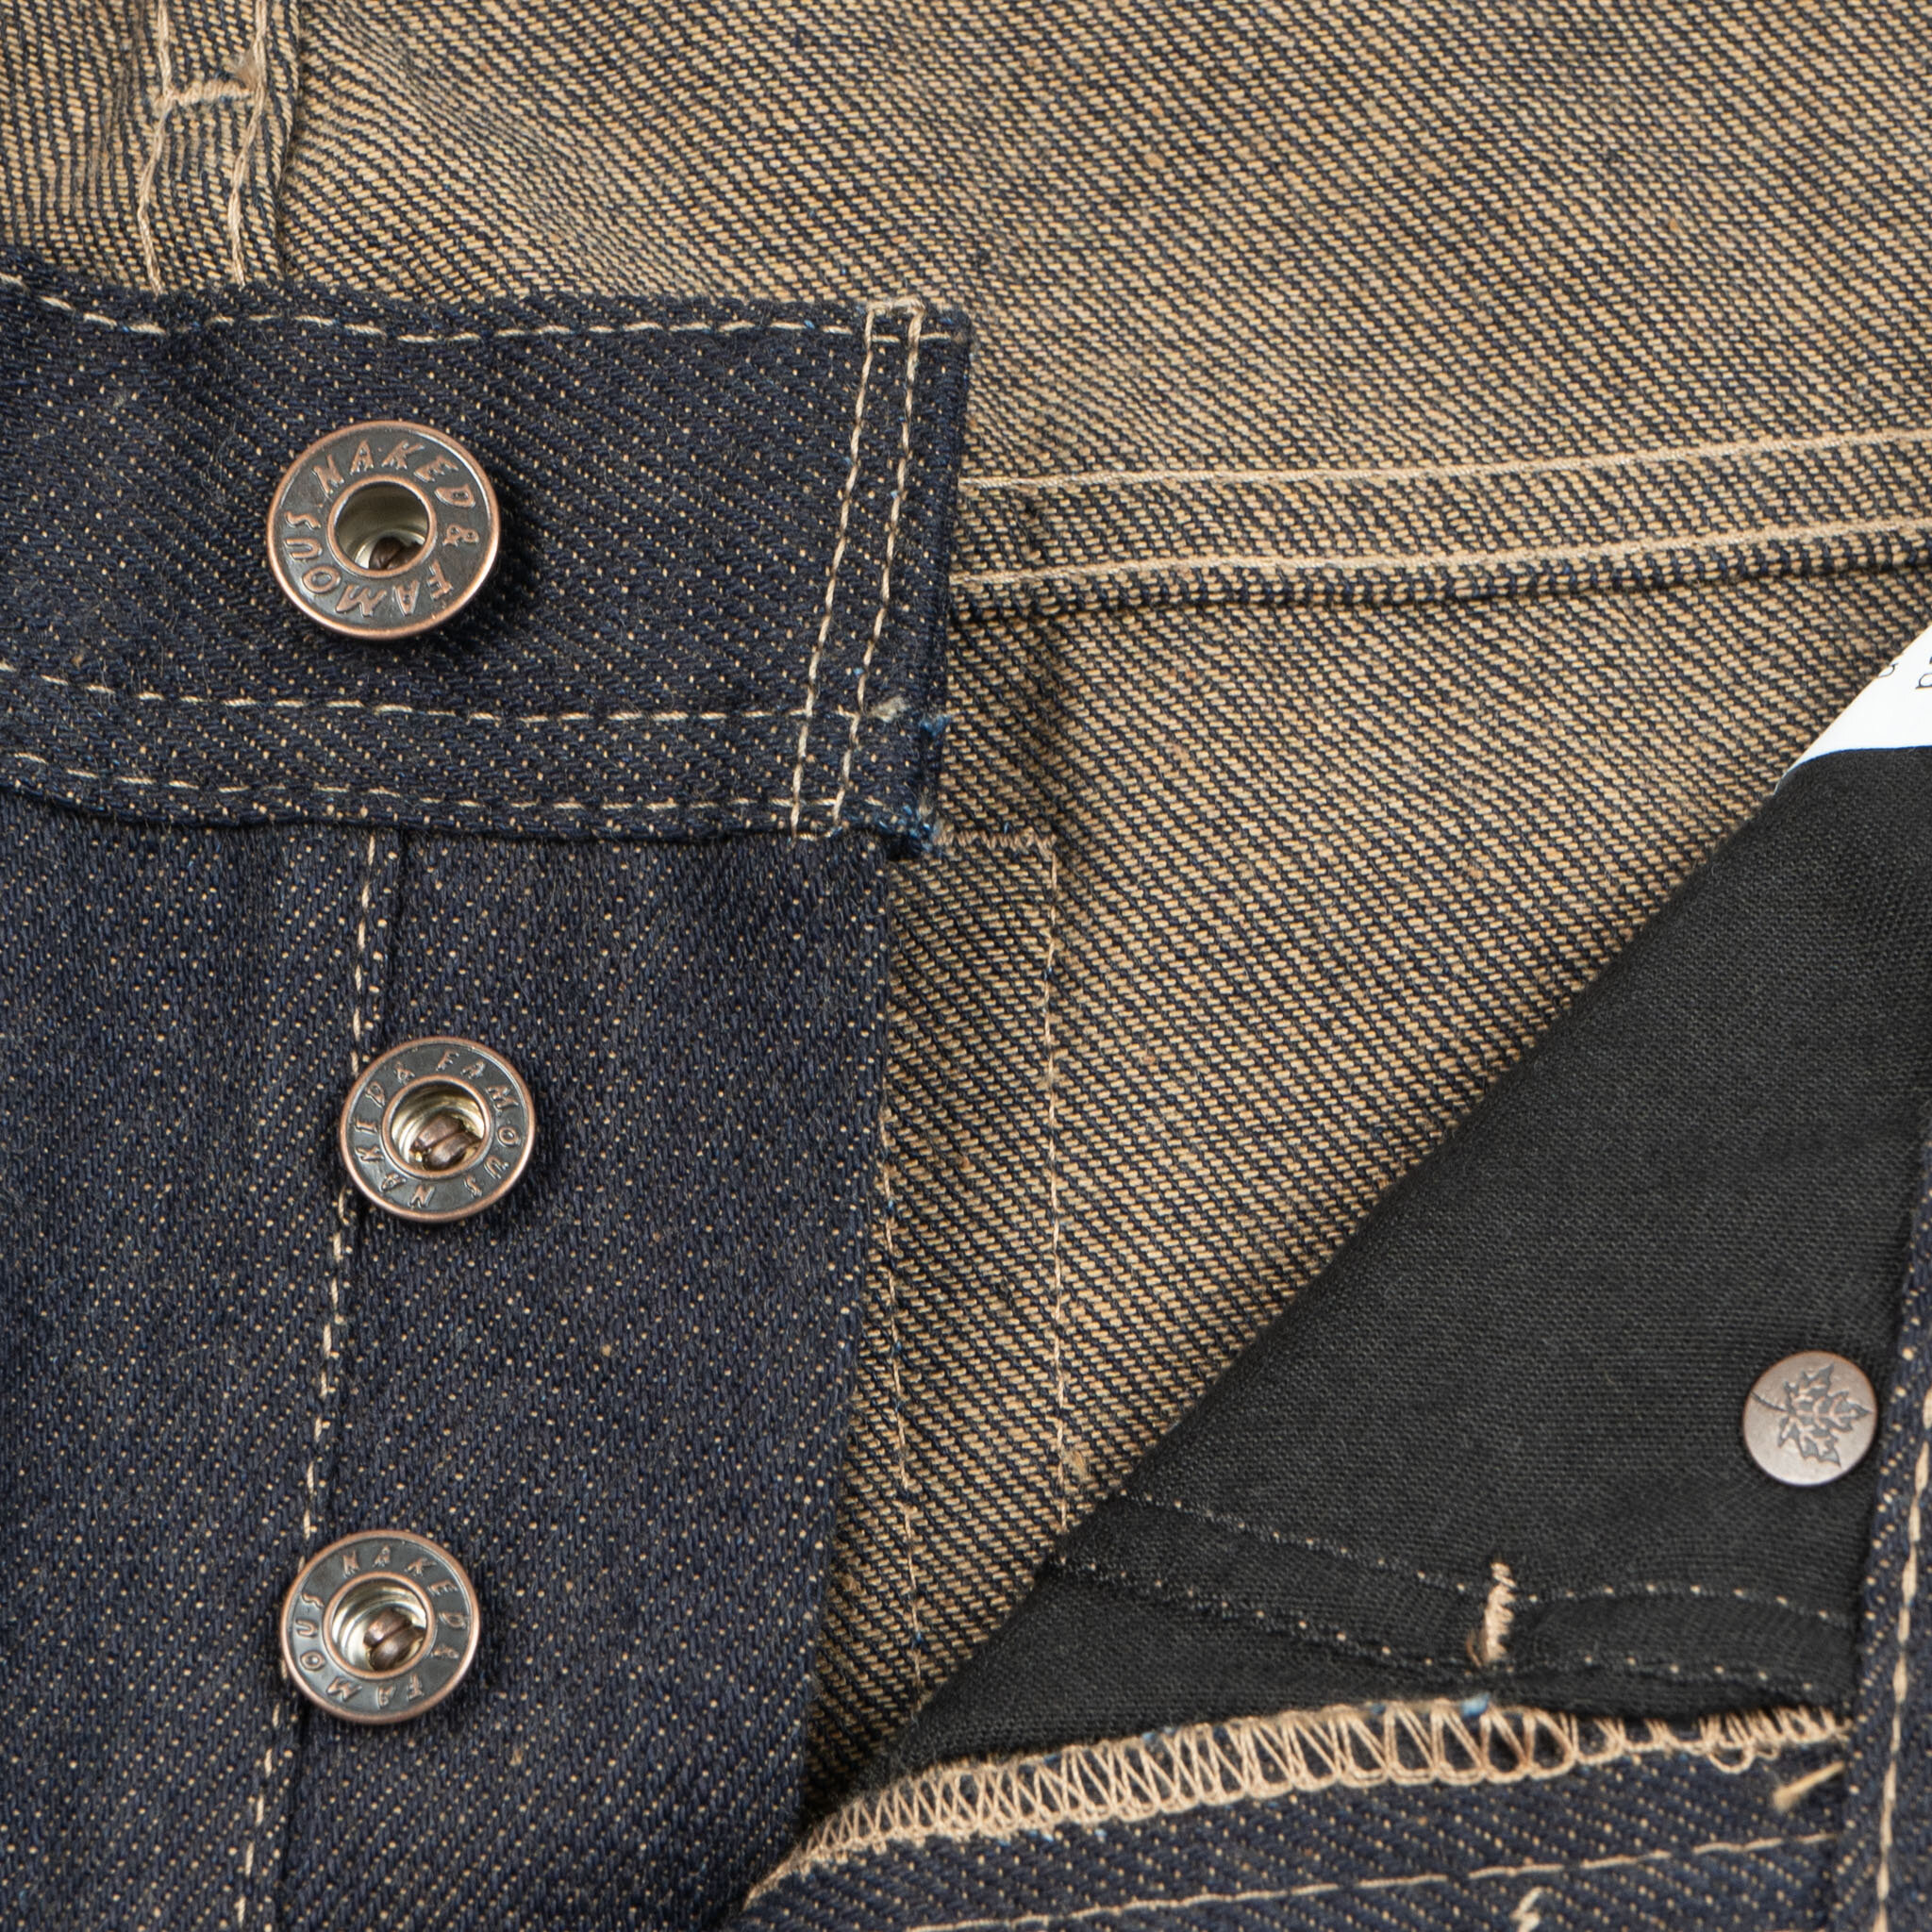  Brown Fox Selvedge Jeans - button fly   